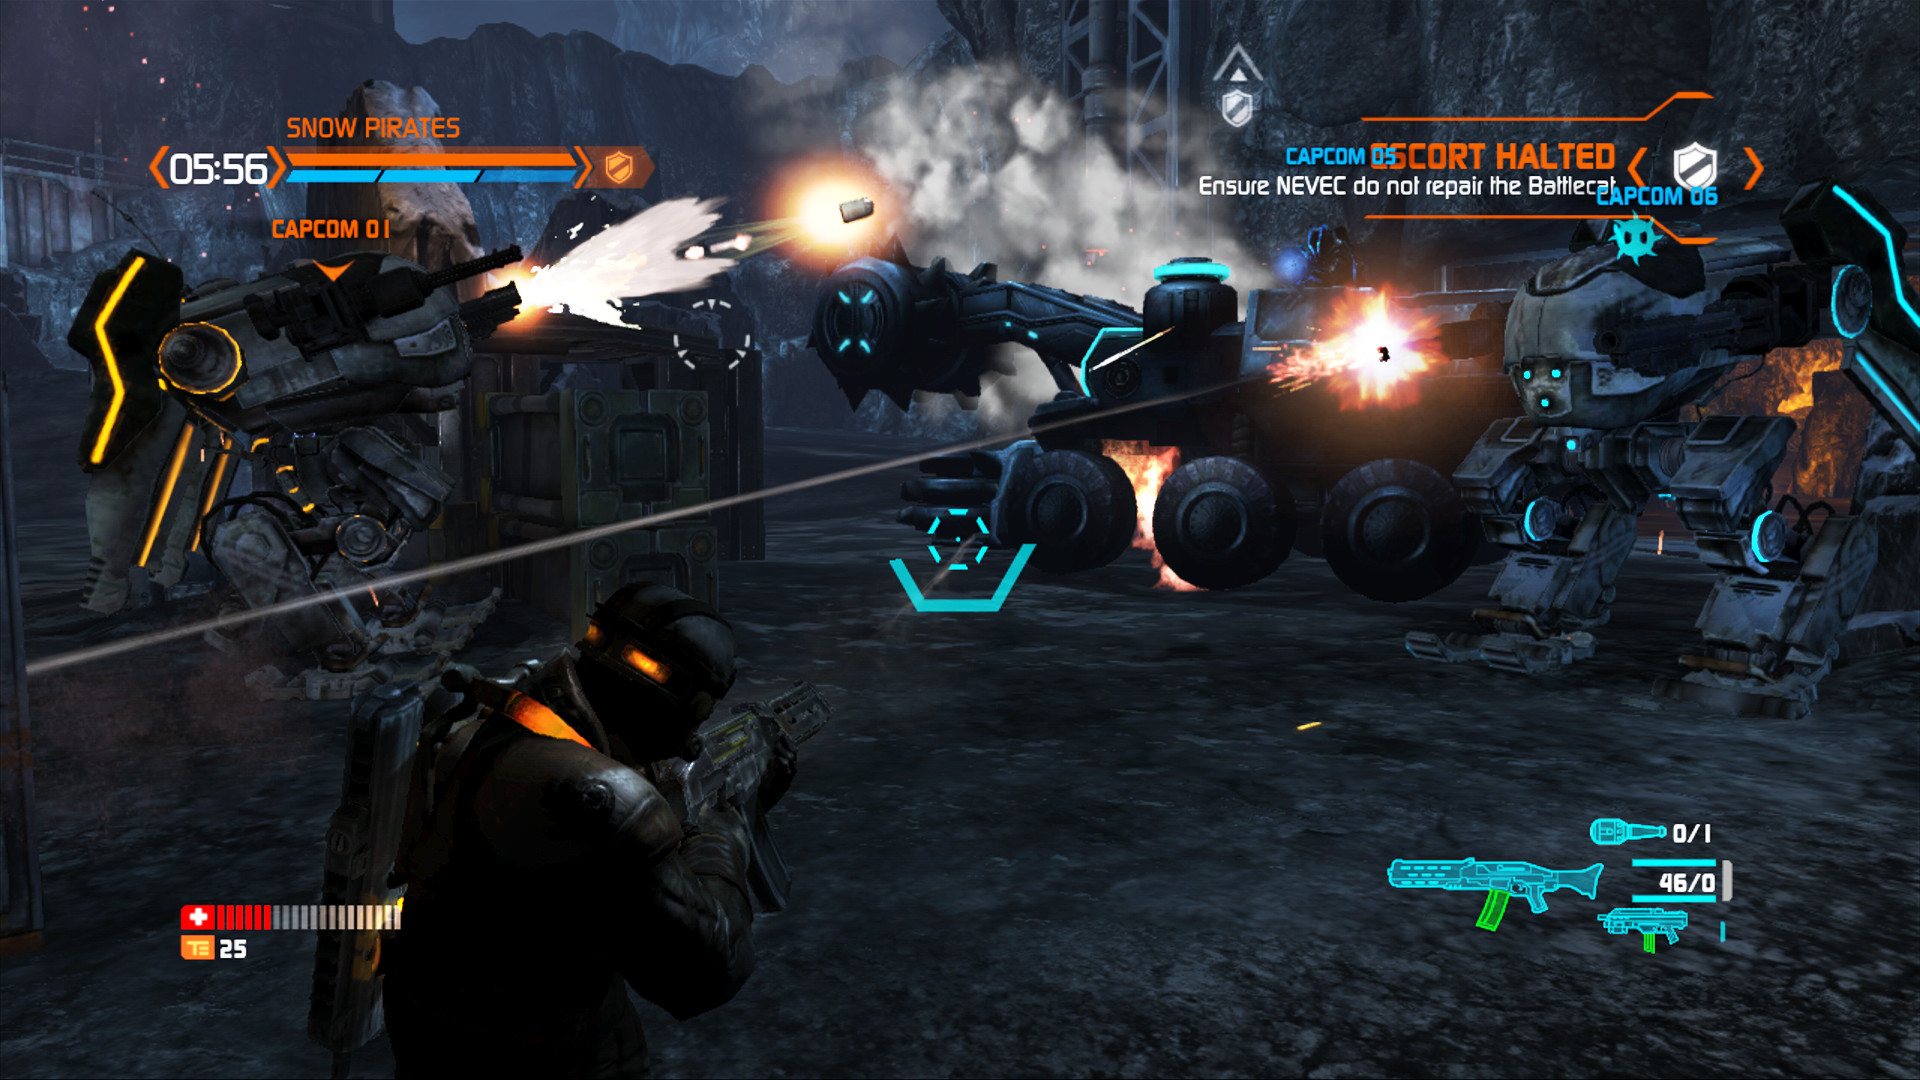 Lost Planet 3 – Hands-on with Multiplayer